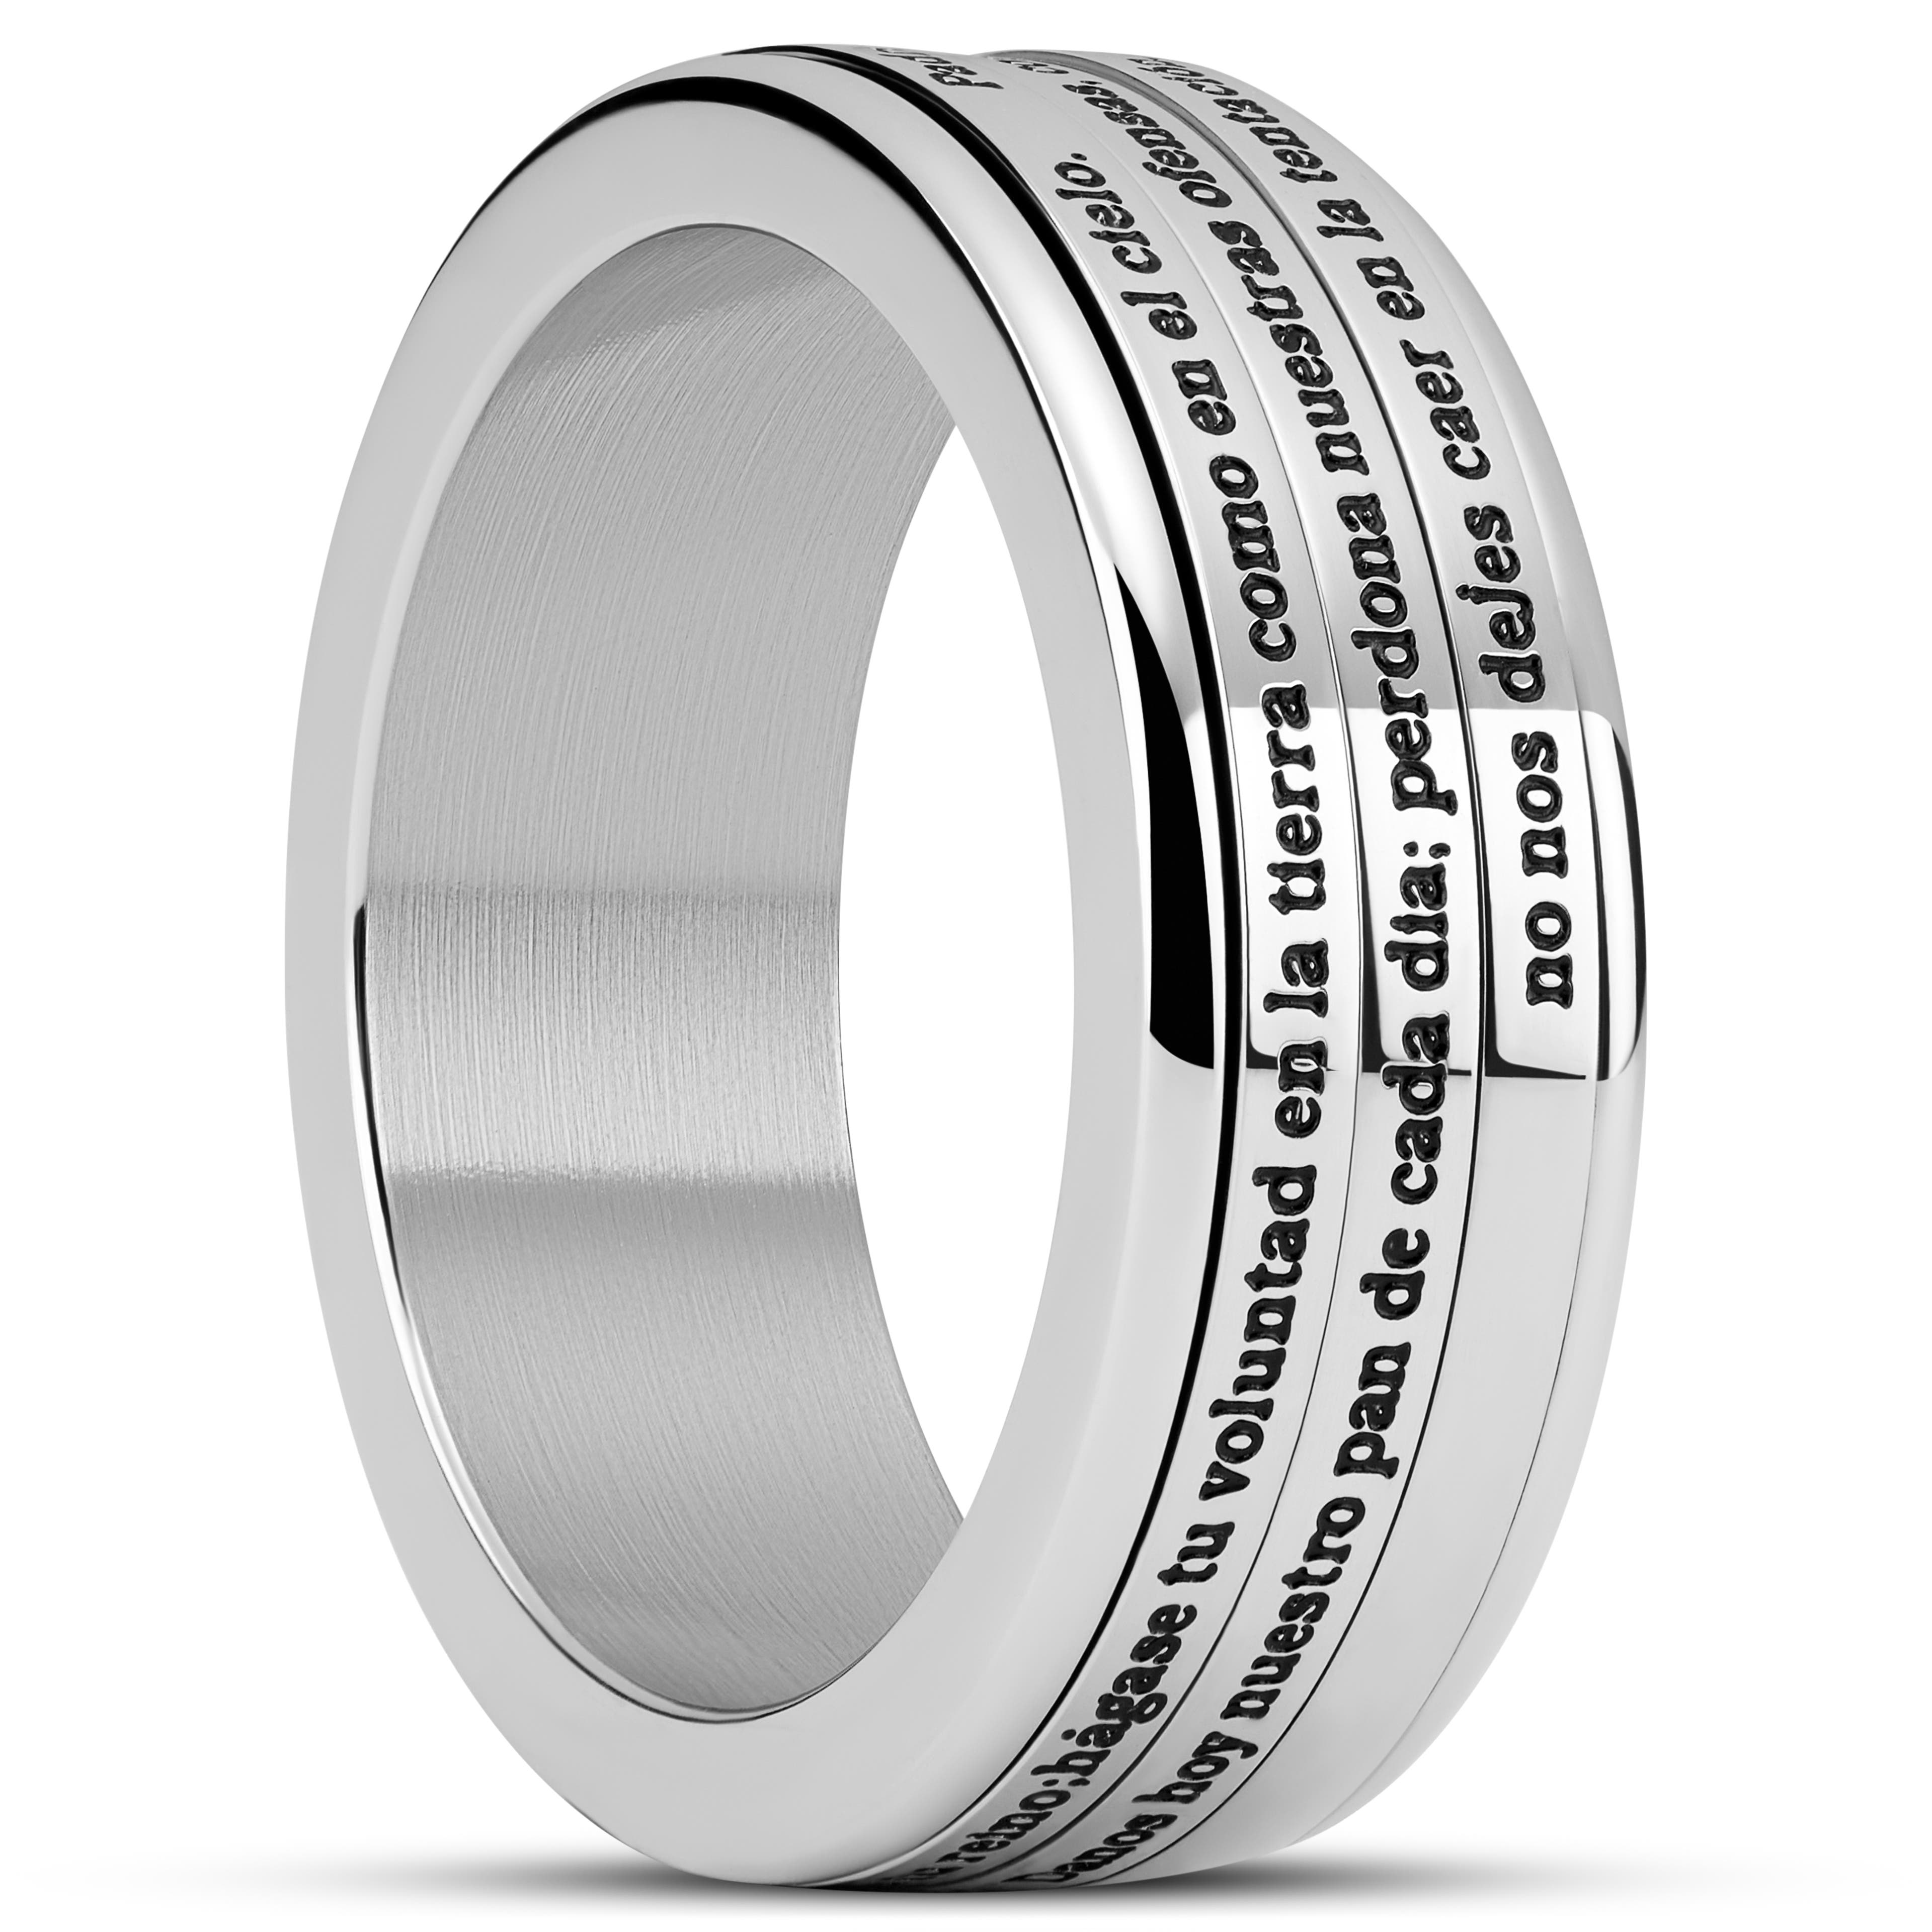 Enthumema | 1/3" (8 mm) Silver-tone Stainless Steel Spanish Lord’s Prayer Fidget Ring